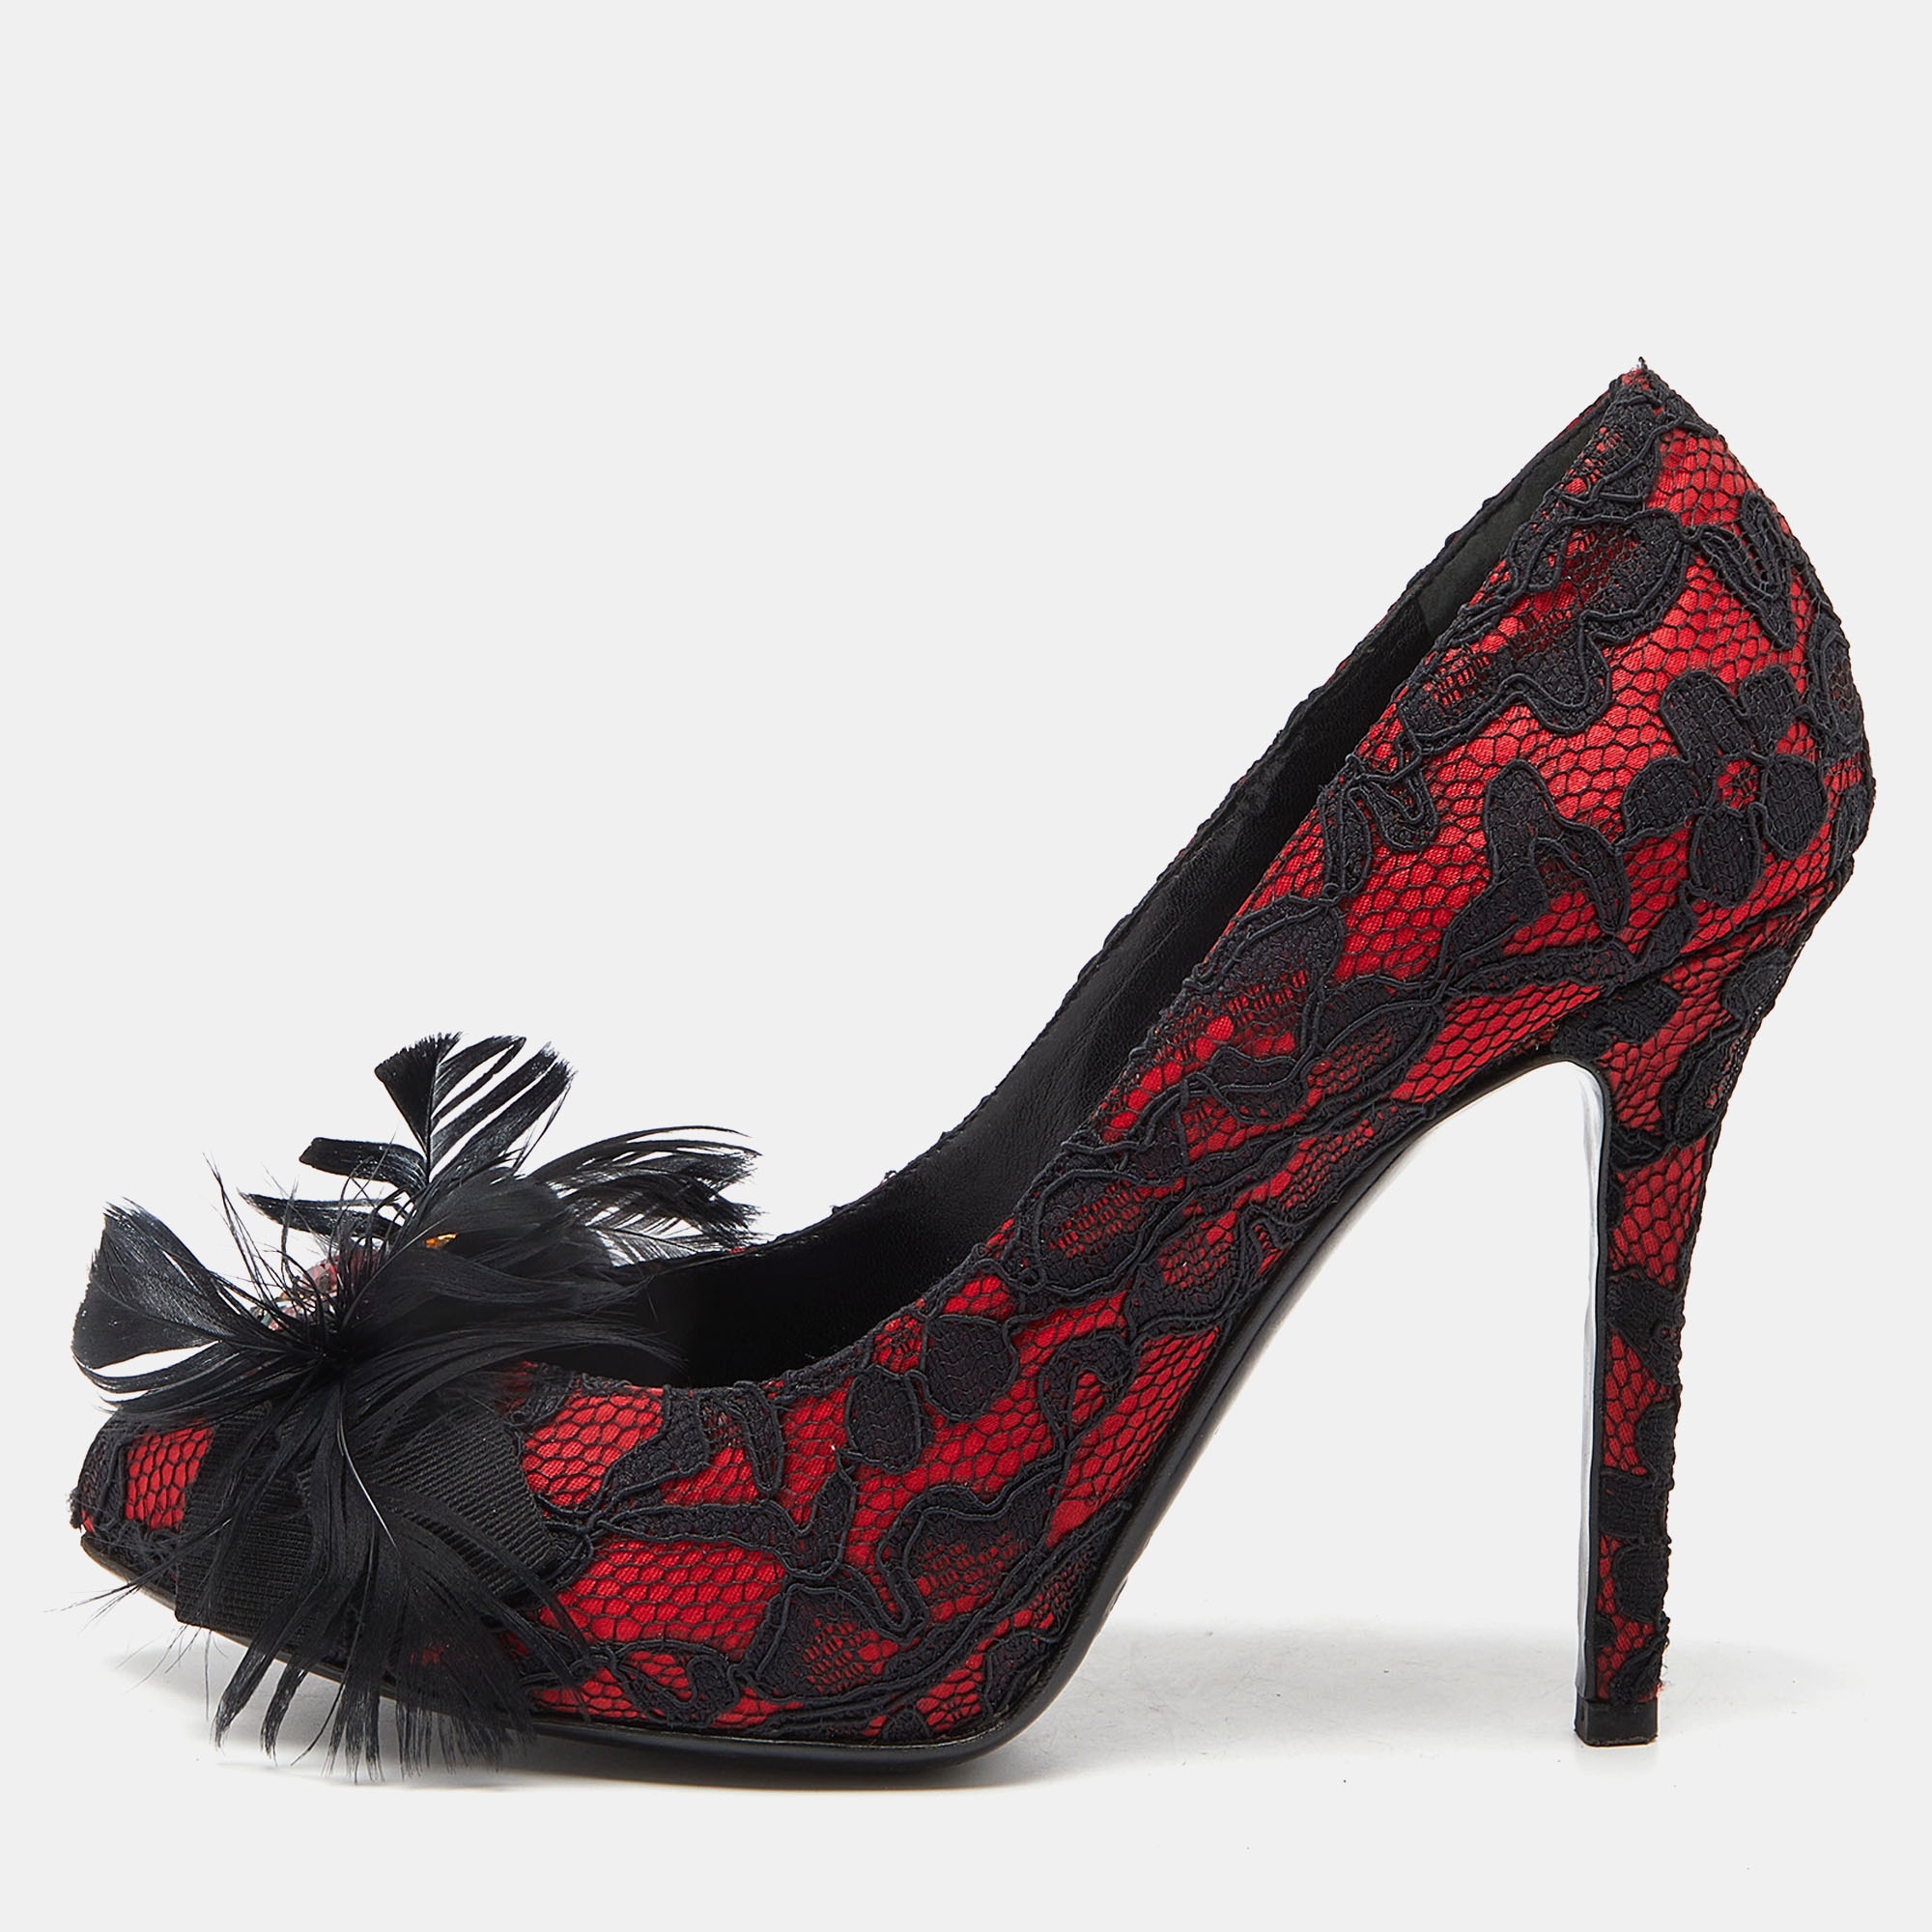 D&g red/black feather and crystal embellished lace and satin pumps size 37.5